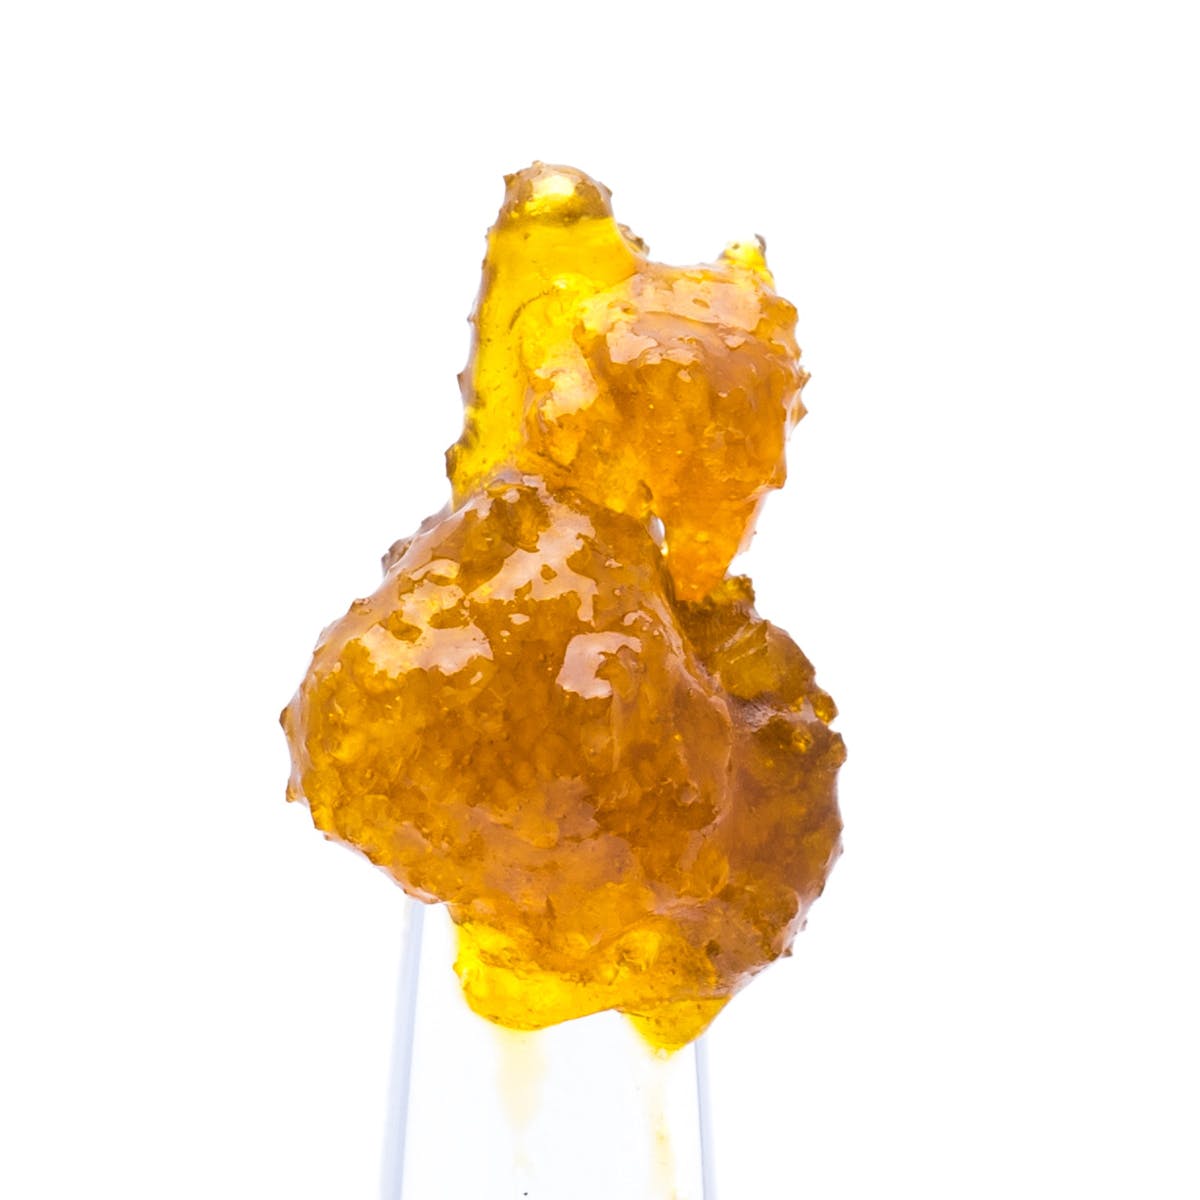 concentrate-buddies-brand-purple-mahayana-live-resin